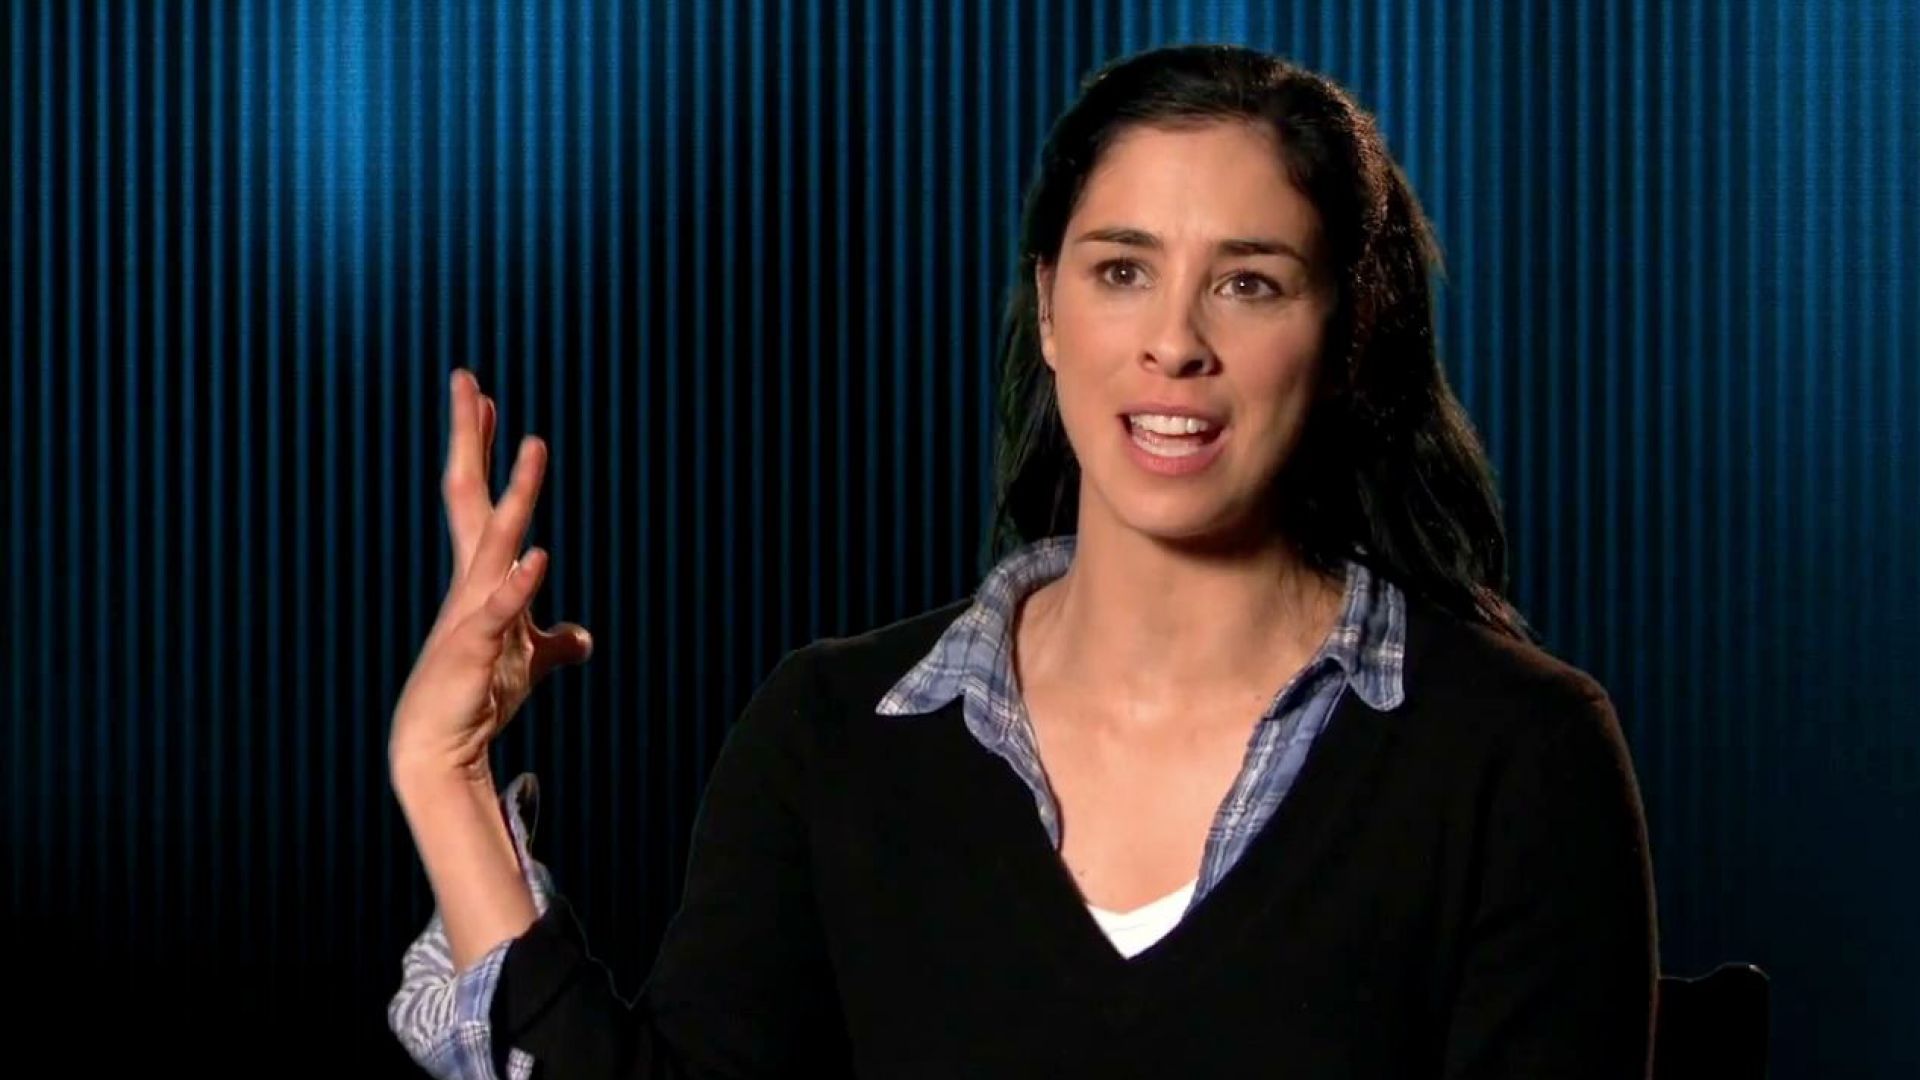 Sarah Silverman talks about not being accepted as Vanellope in Wreck-It Ralph